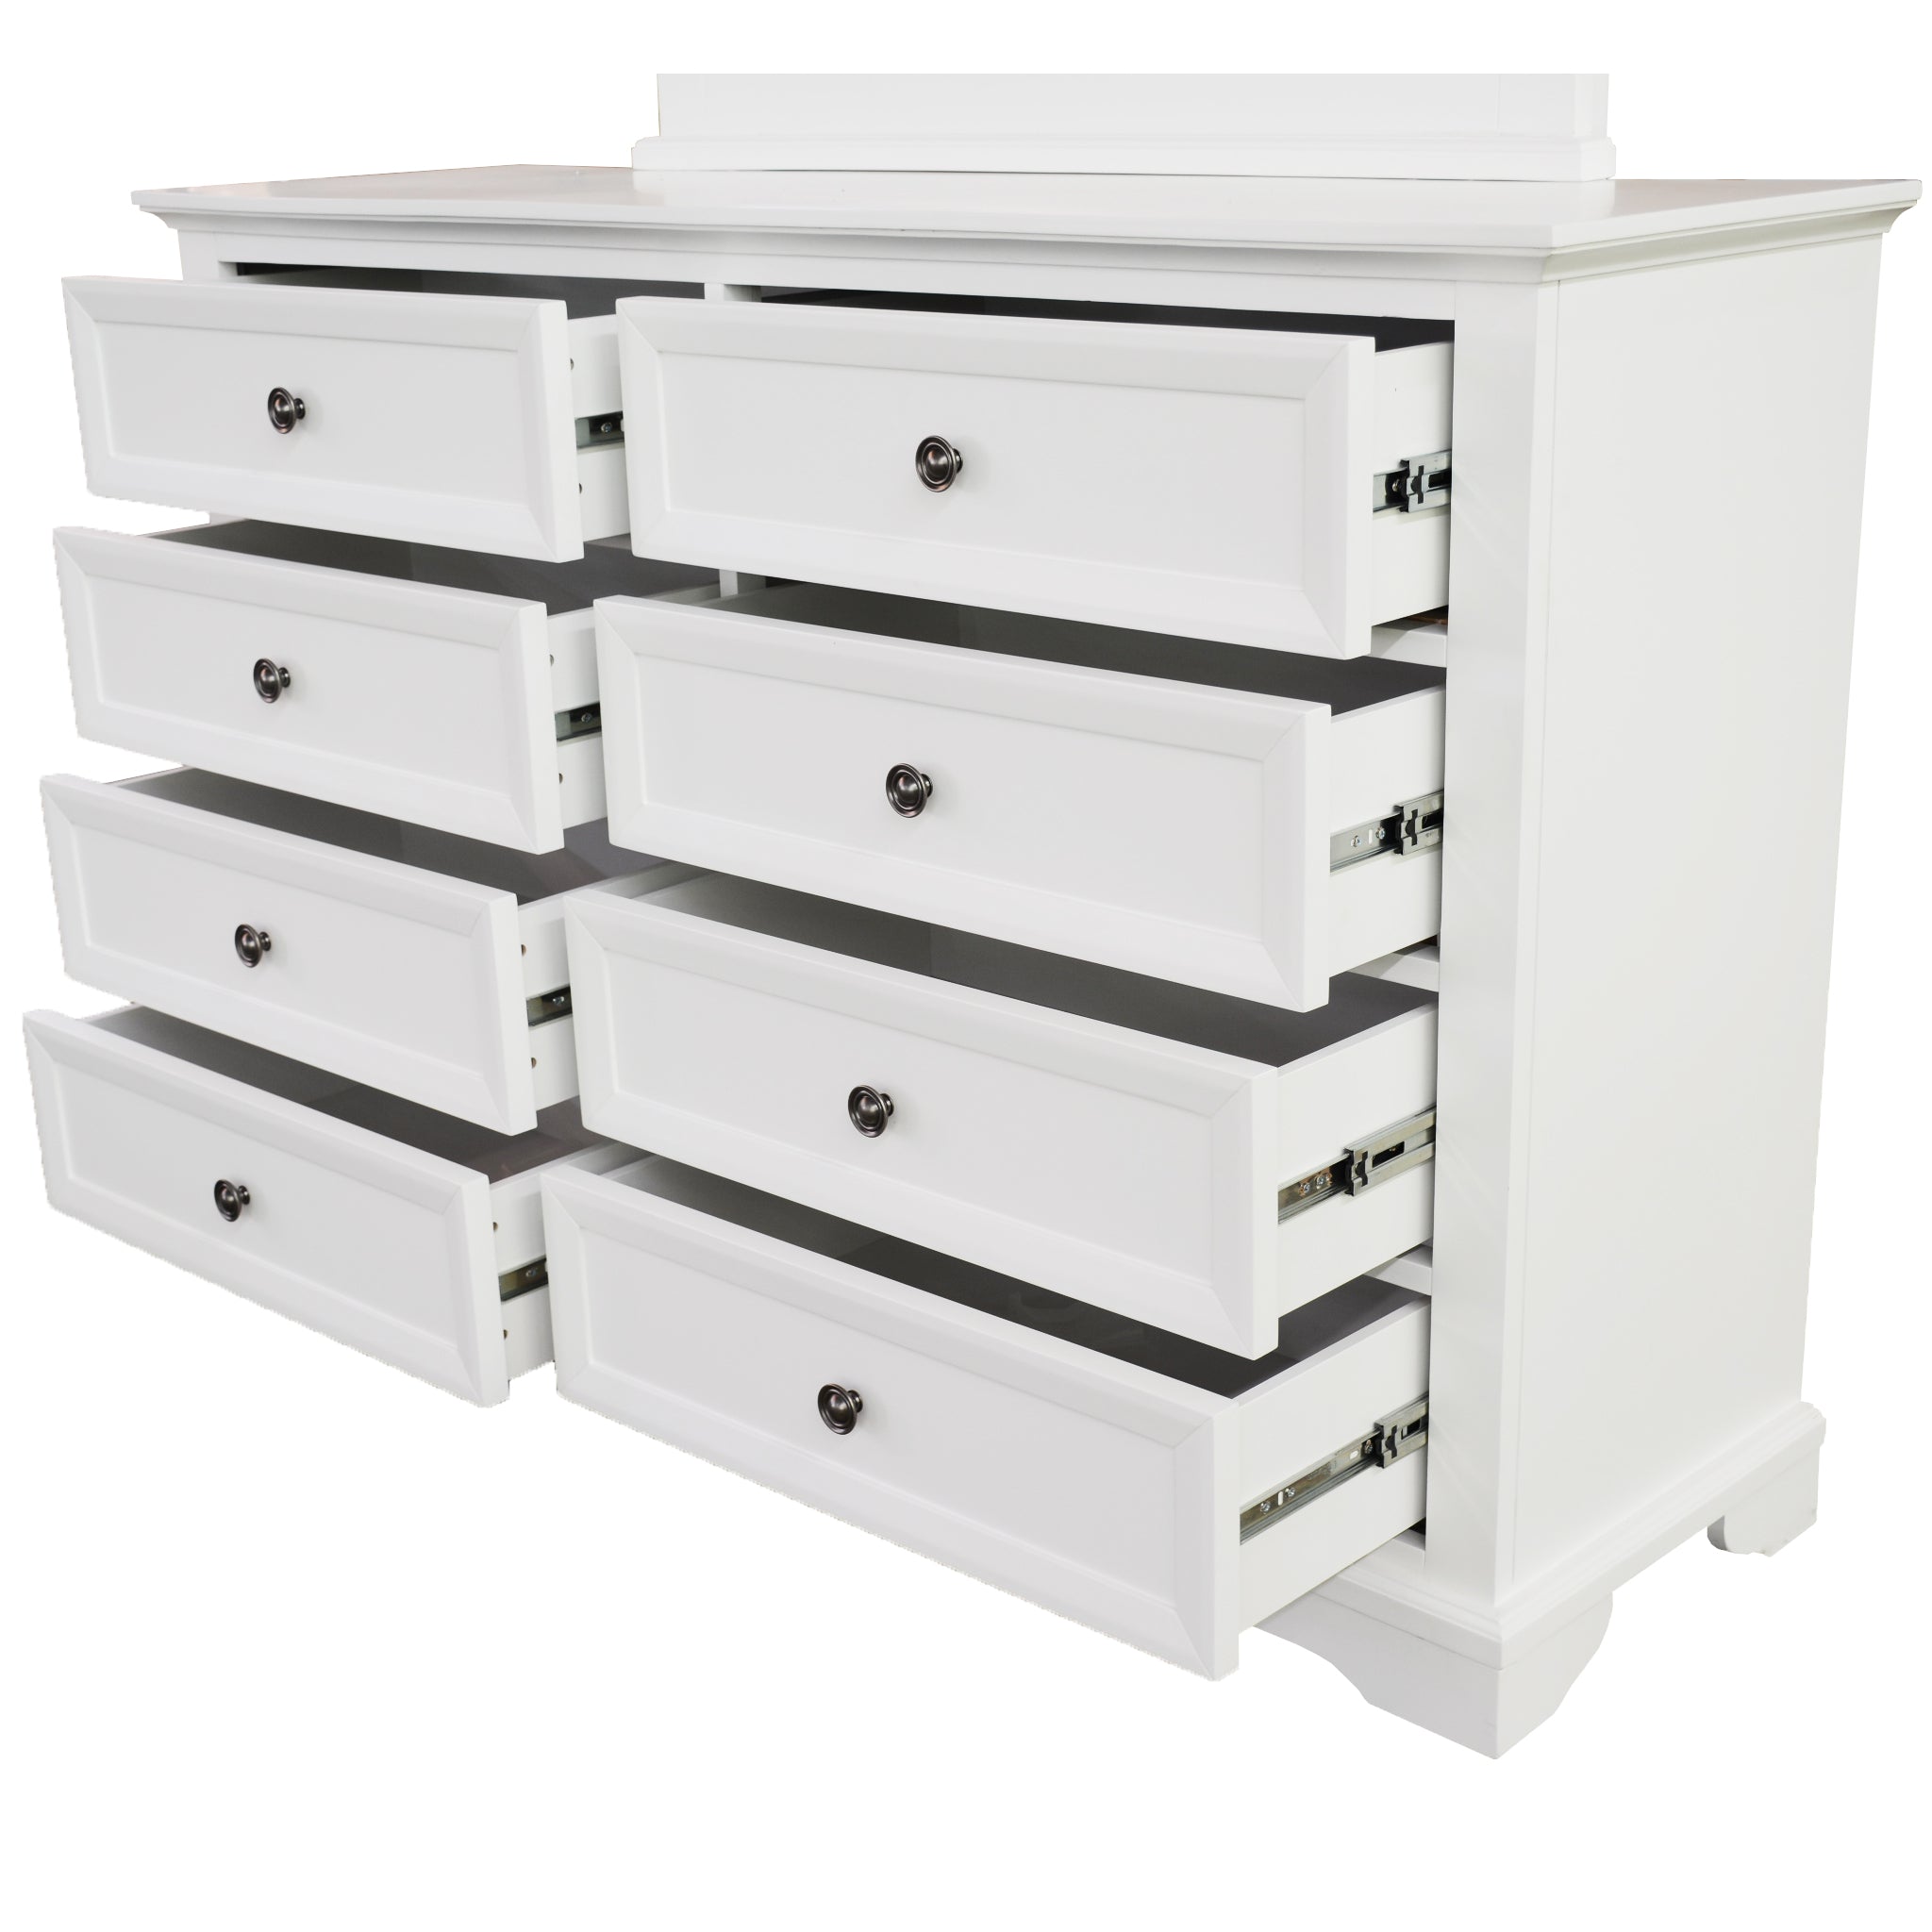 Dresser 8 Chest of Drawers Bedroom Acacia Timber Storage Cabinet - White